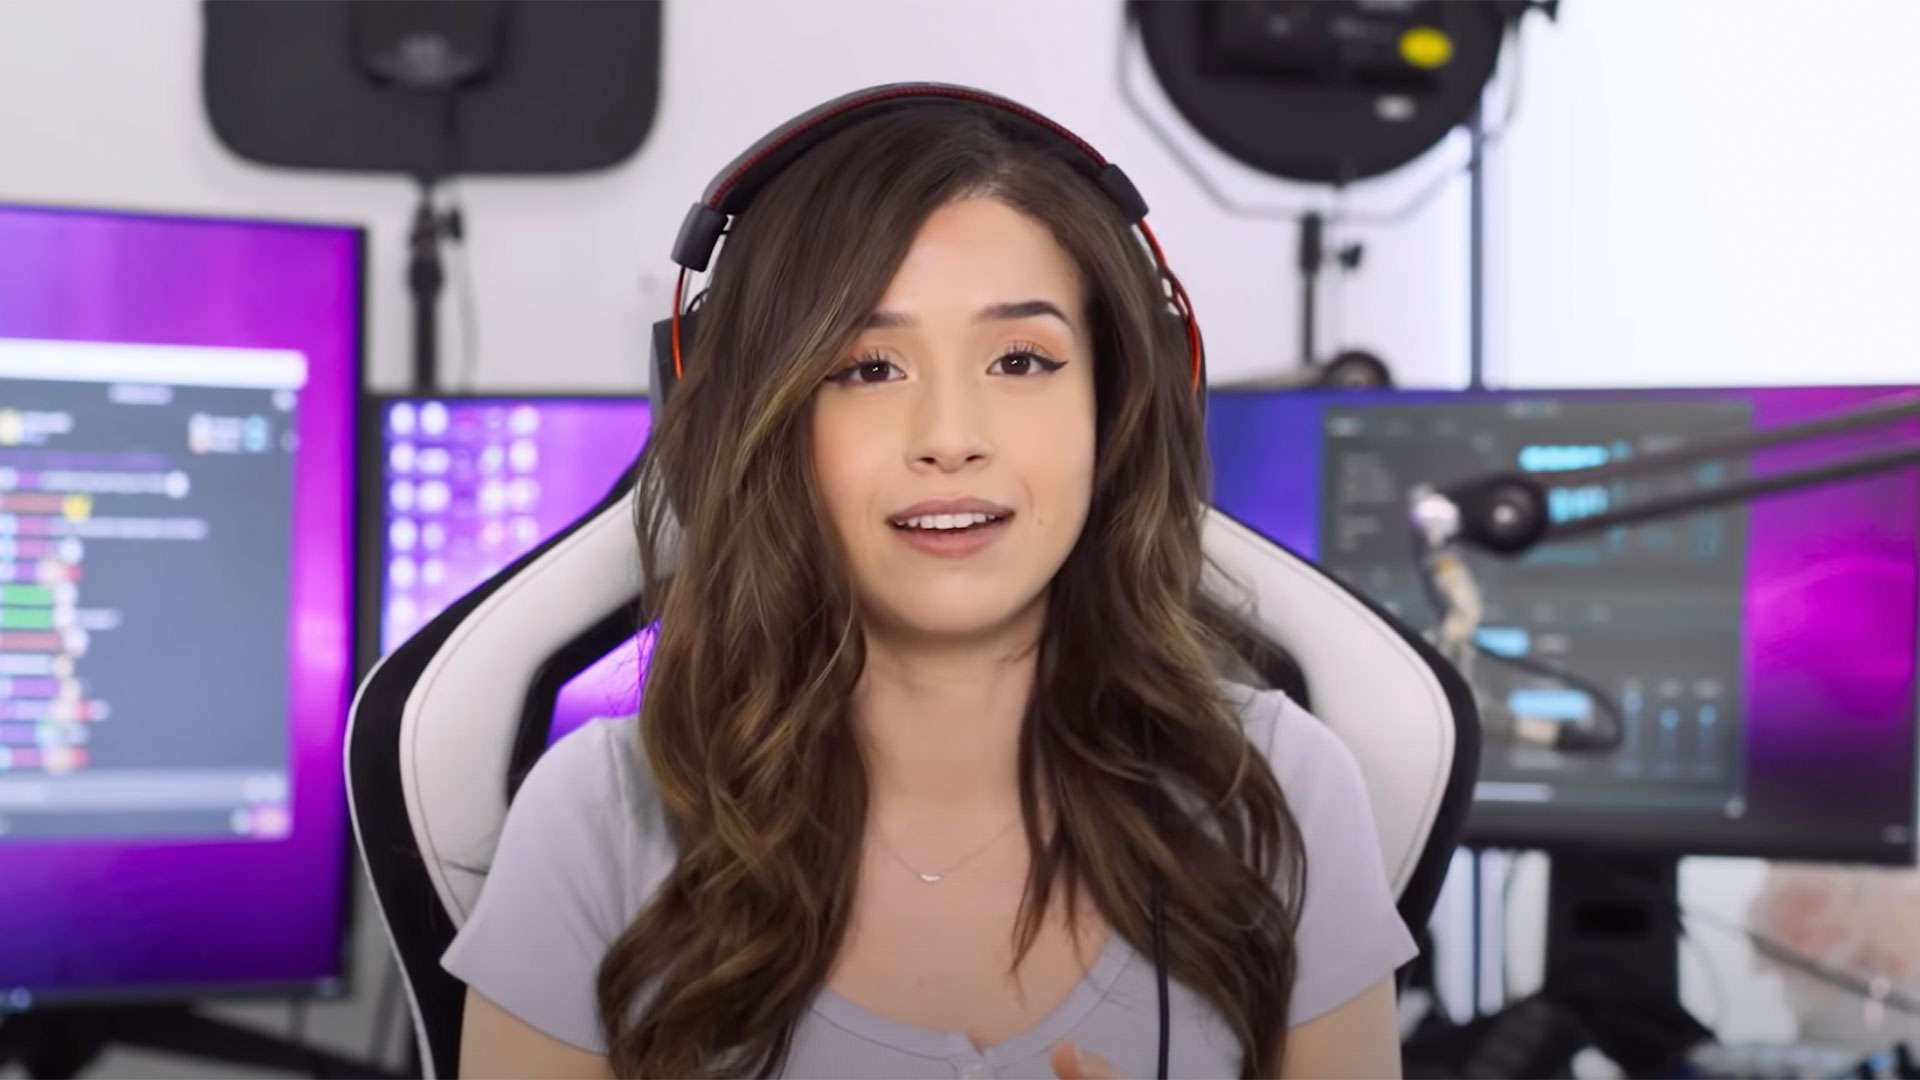 Twitch: Pokimane also wants to focus on content other than gaming in the future